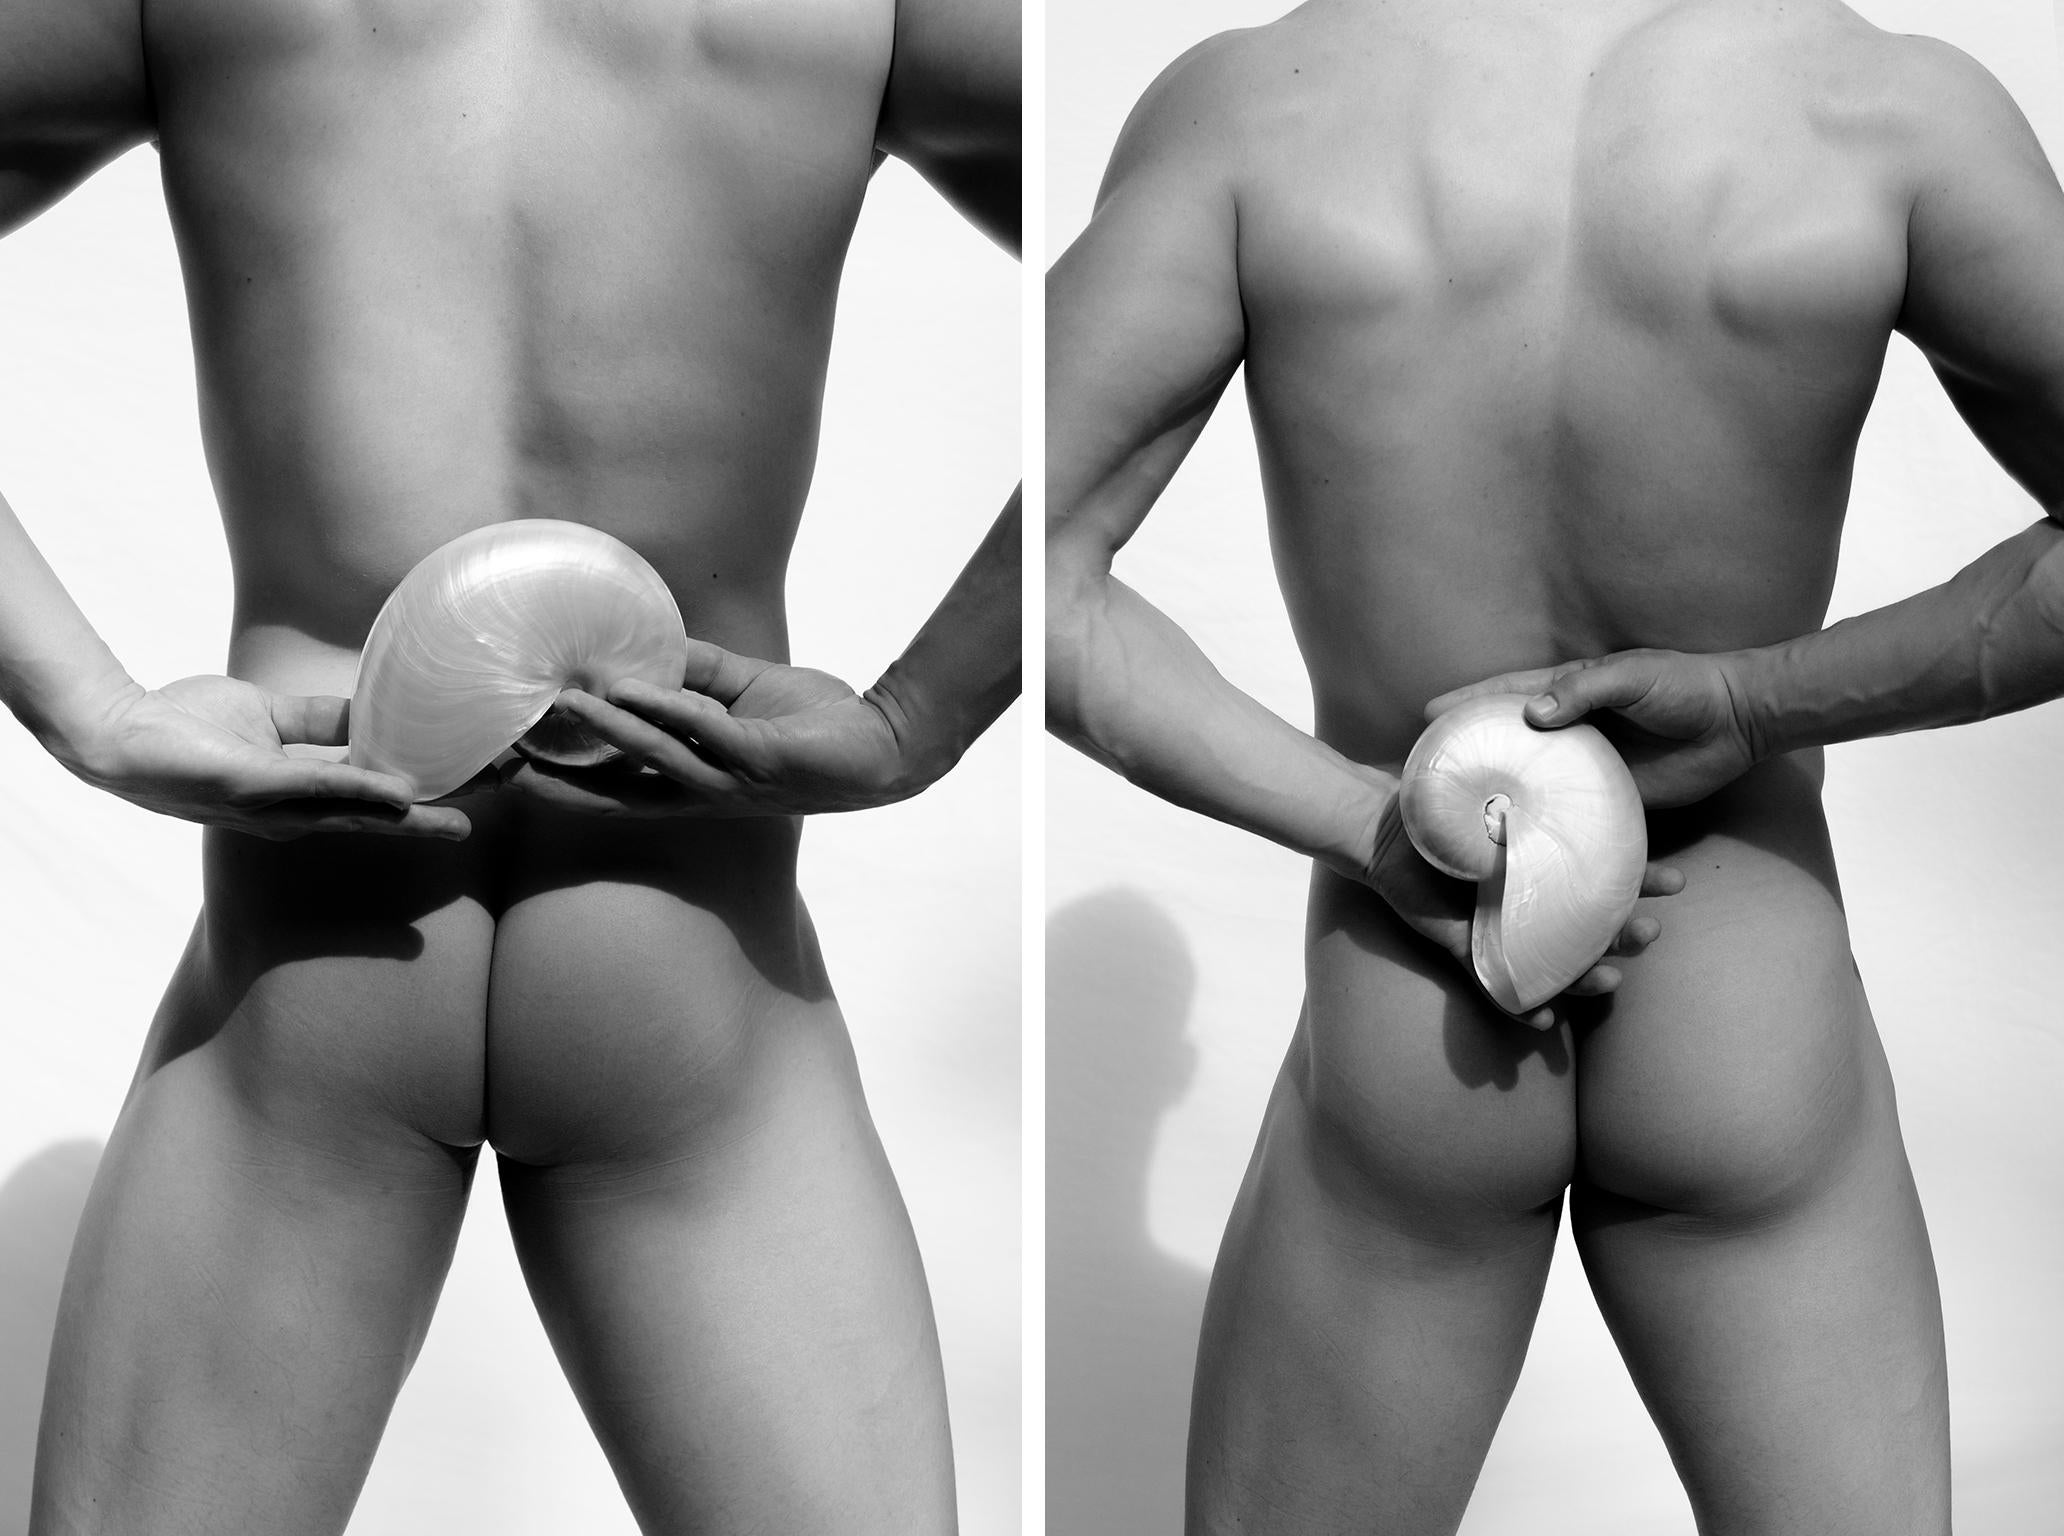 Espiral Dos & Espiral. Diptych. Male Nudes. Black and White Photographs